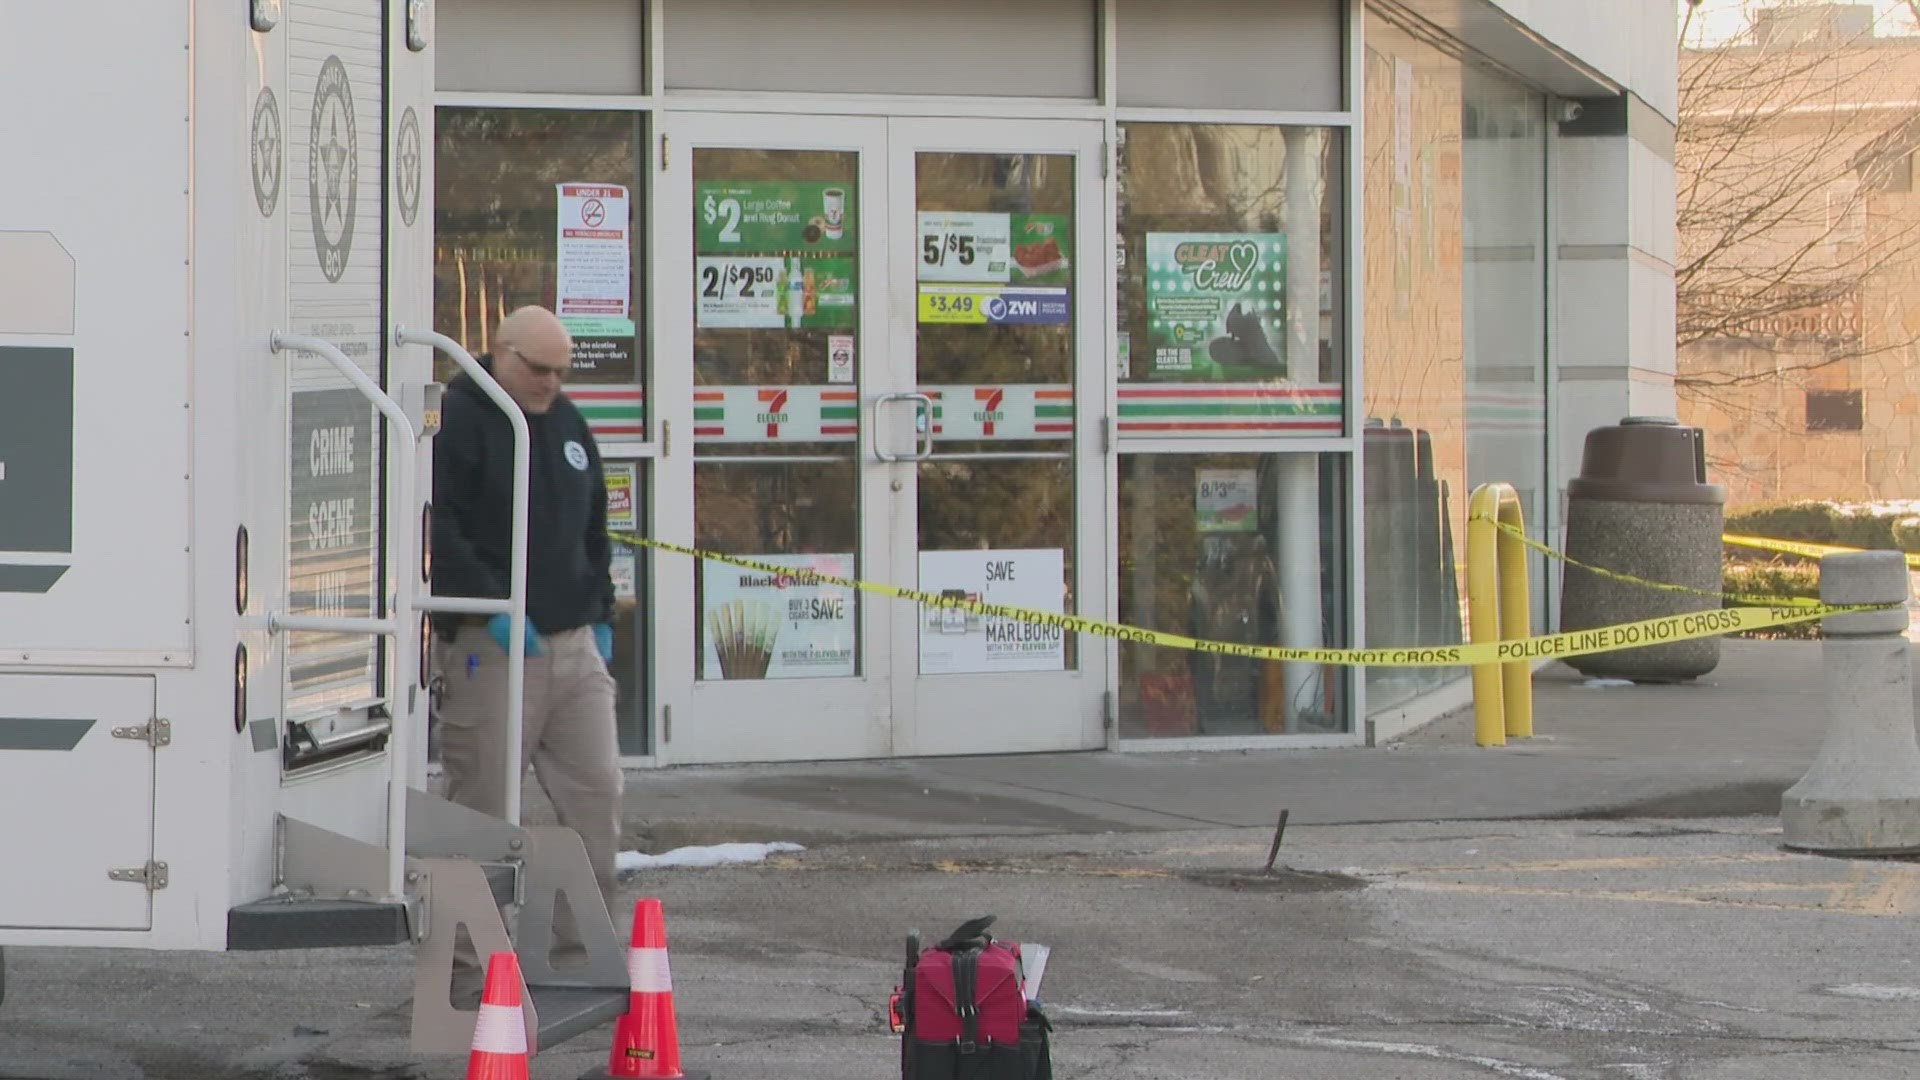 Shaker Heights police say it was around 6:33 a.m. when officers responded to the scene where an employee had been shot inside the store.